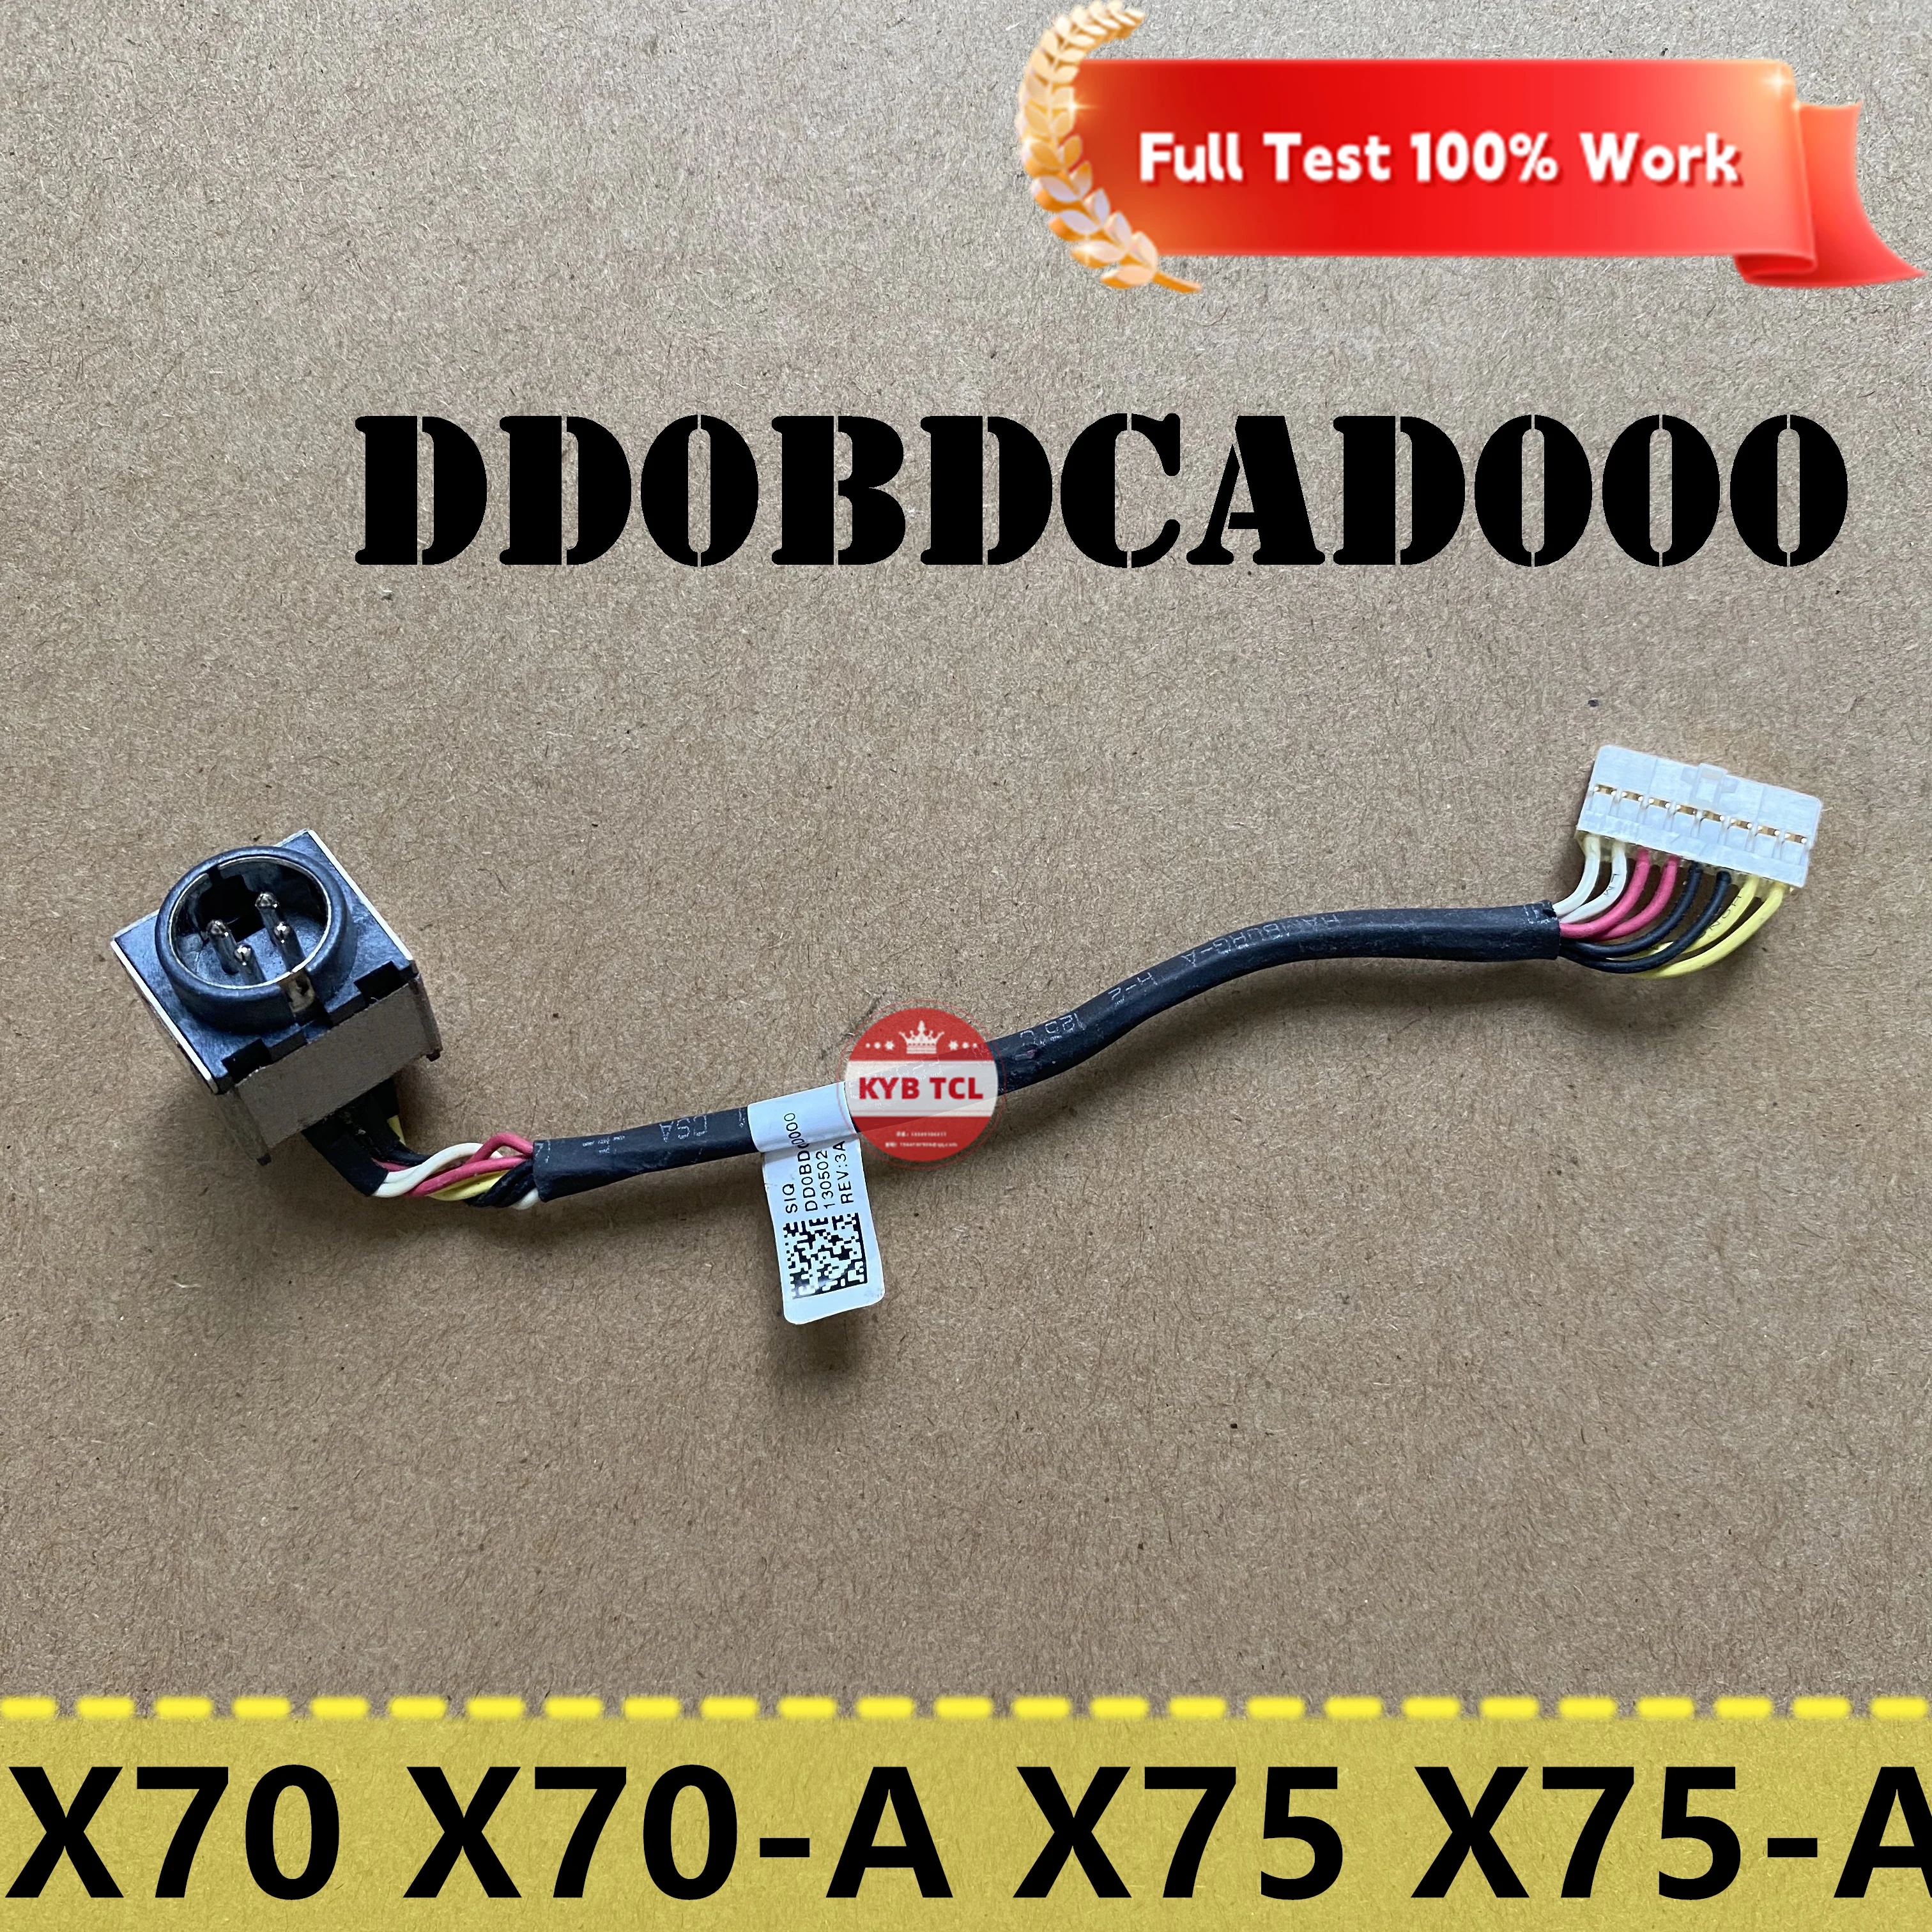 

For Toshiba Qosmio X70 X70-A X75 X75-A Laptop Power Connector Power Socket with Cable Notebook DD0BDCAD000